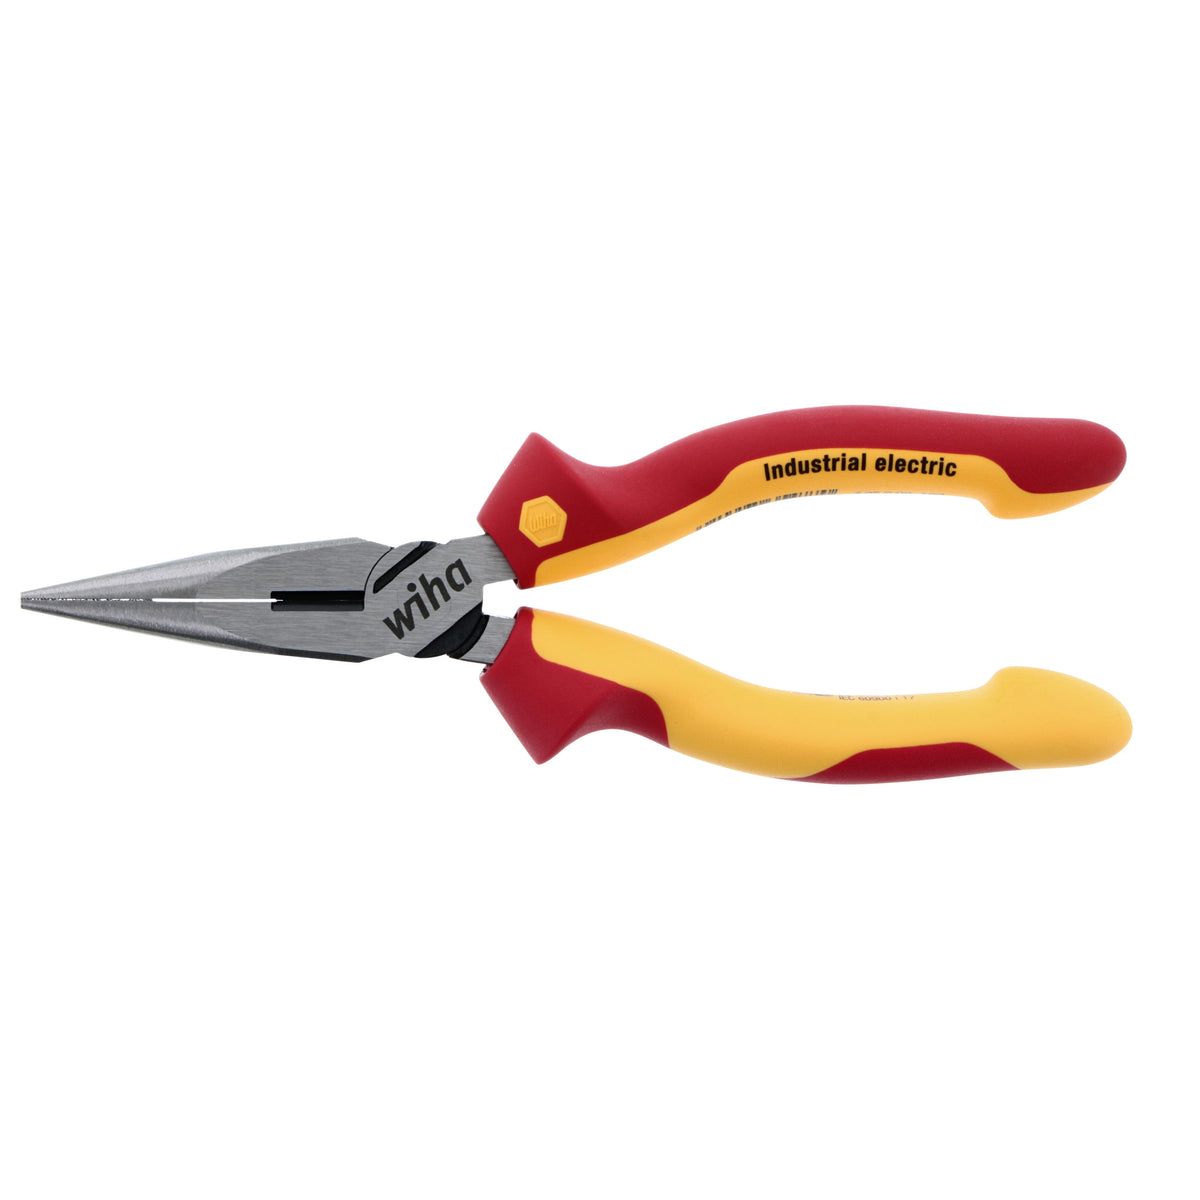 Wiha 32926 Insulated Industrial Long Nose Pliers 6.3"